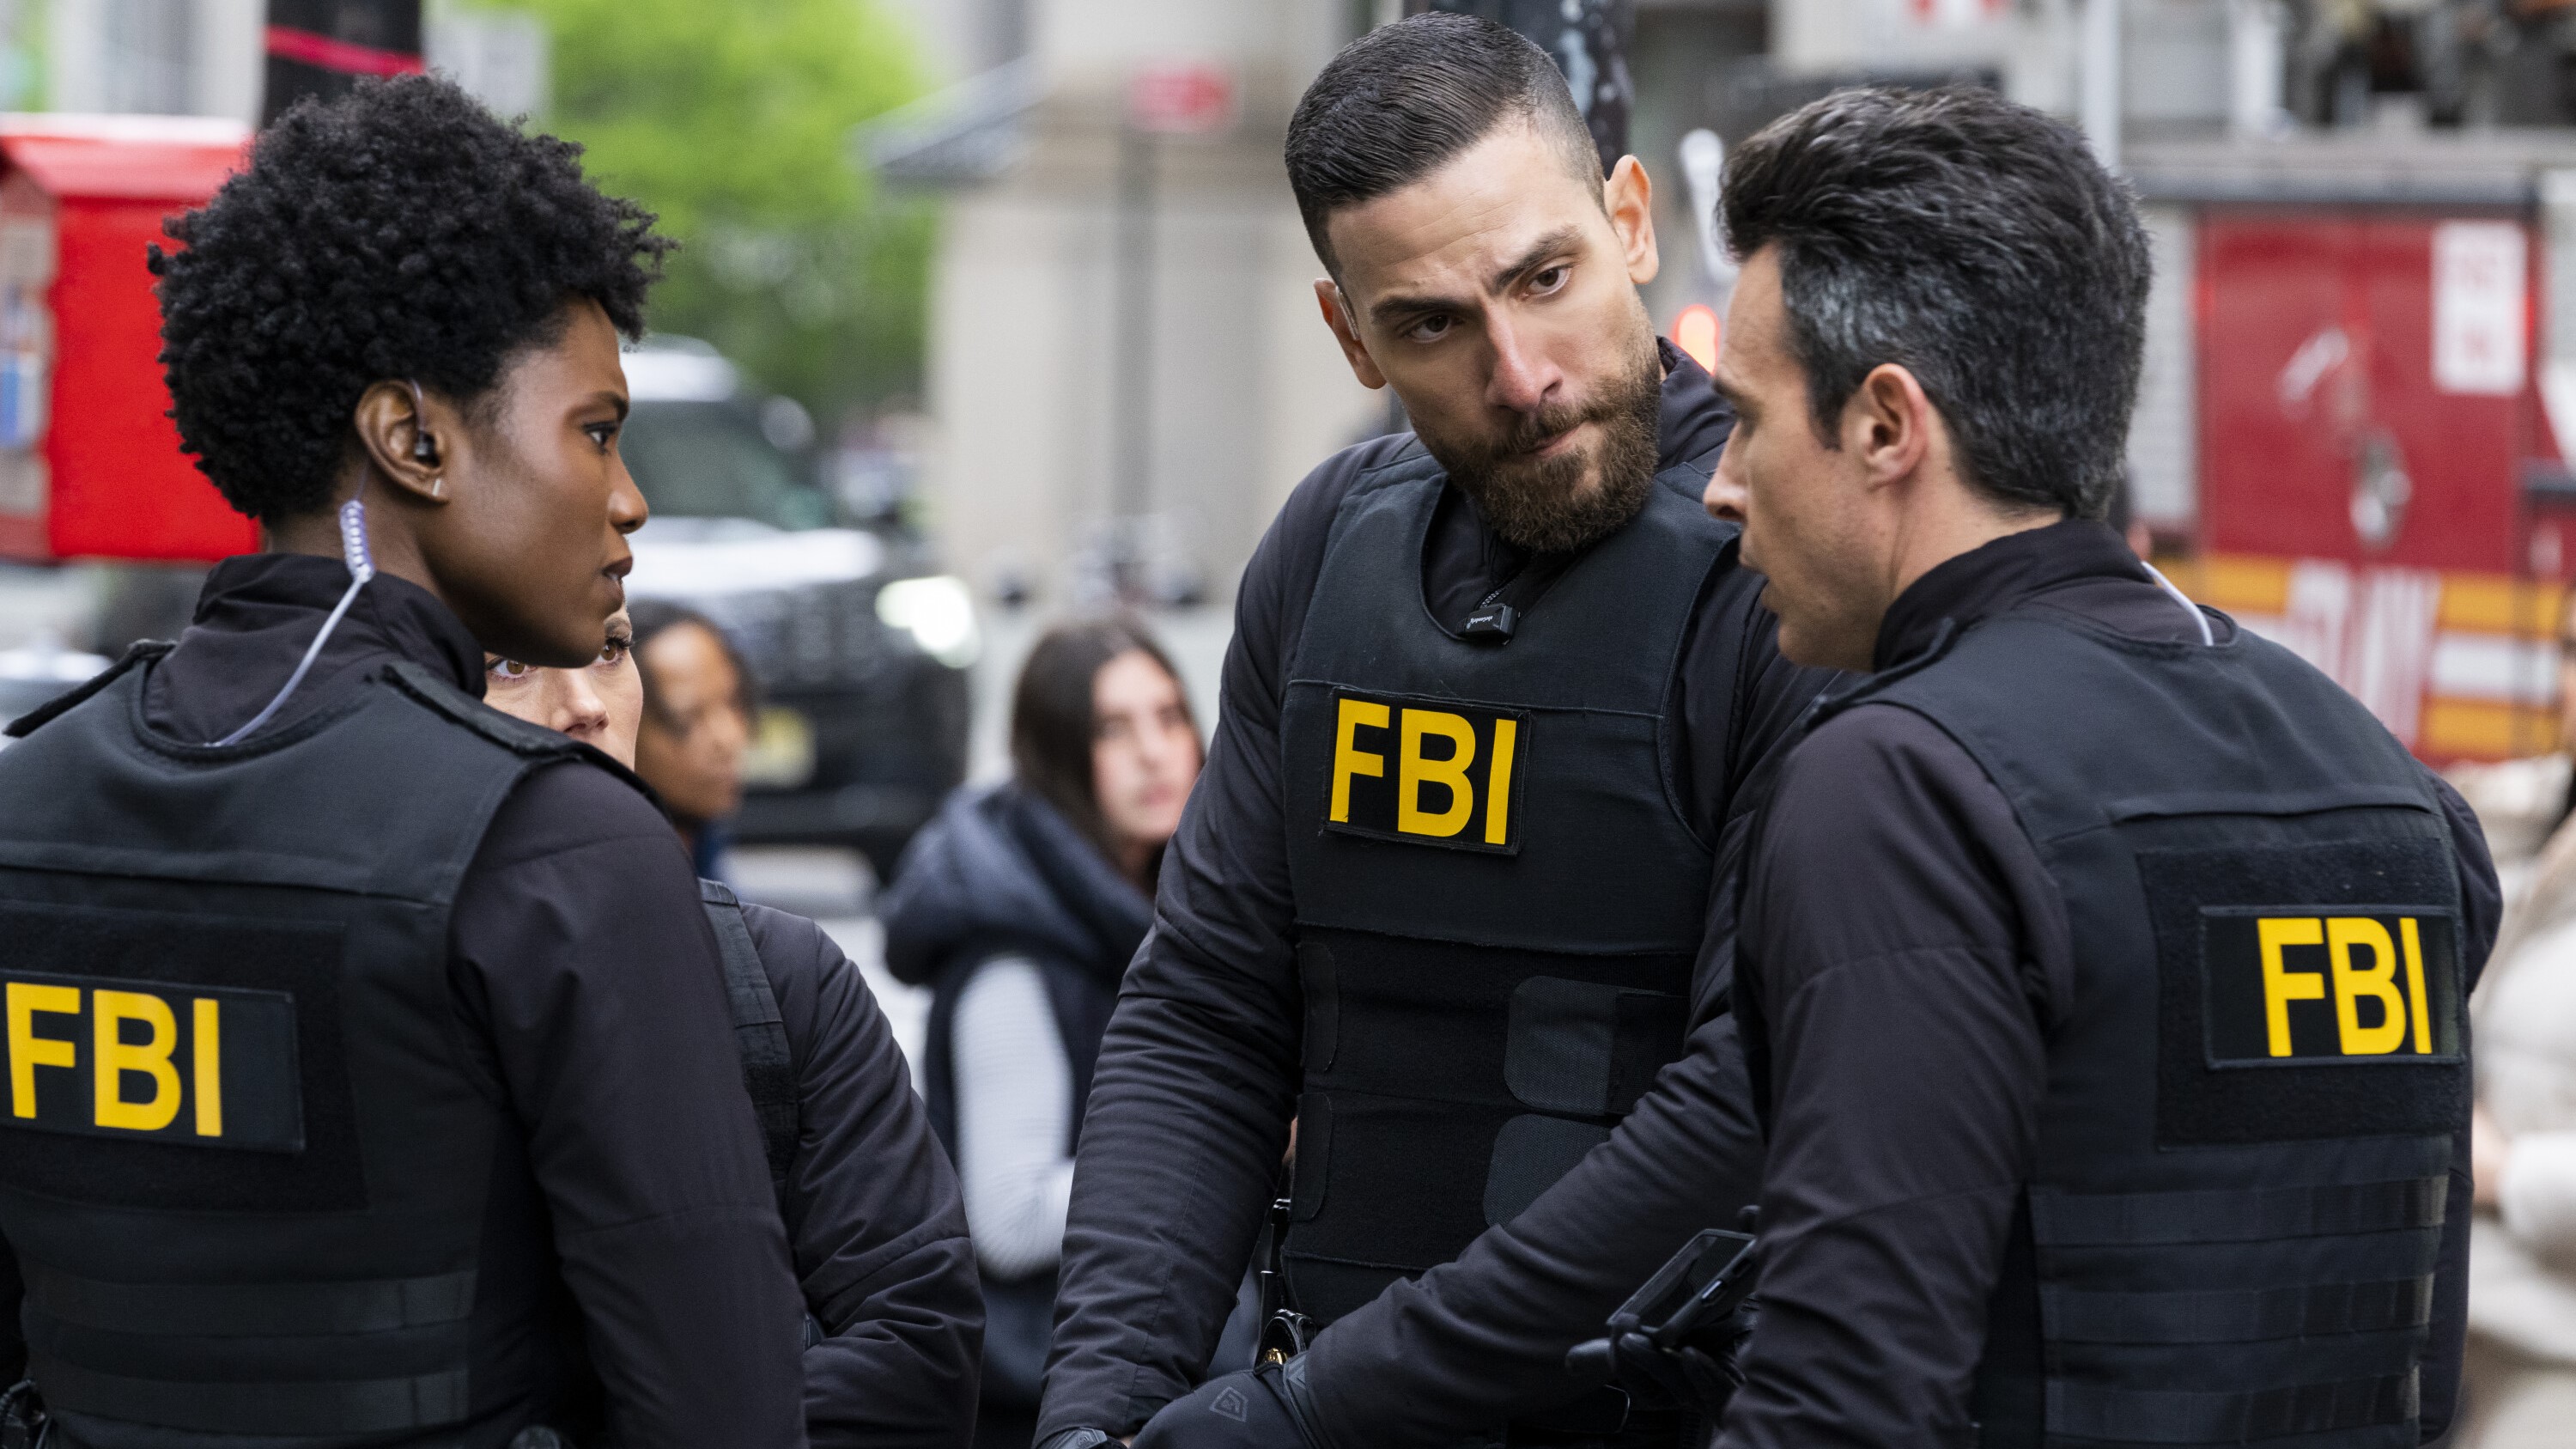 FBI season 5: next episode info and everything we know